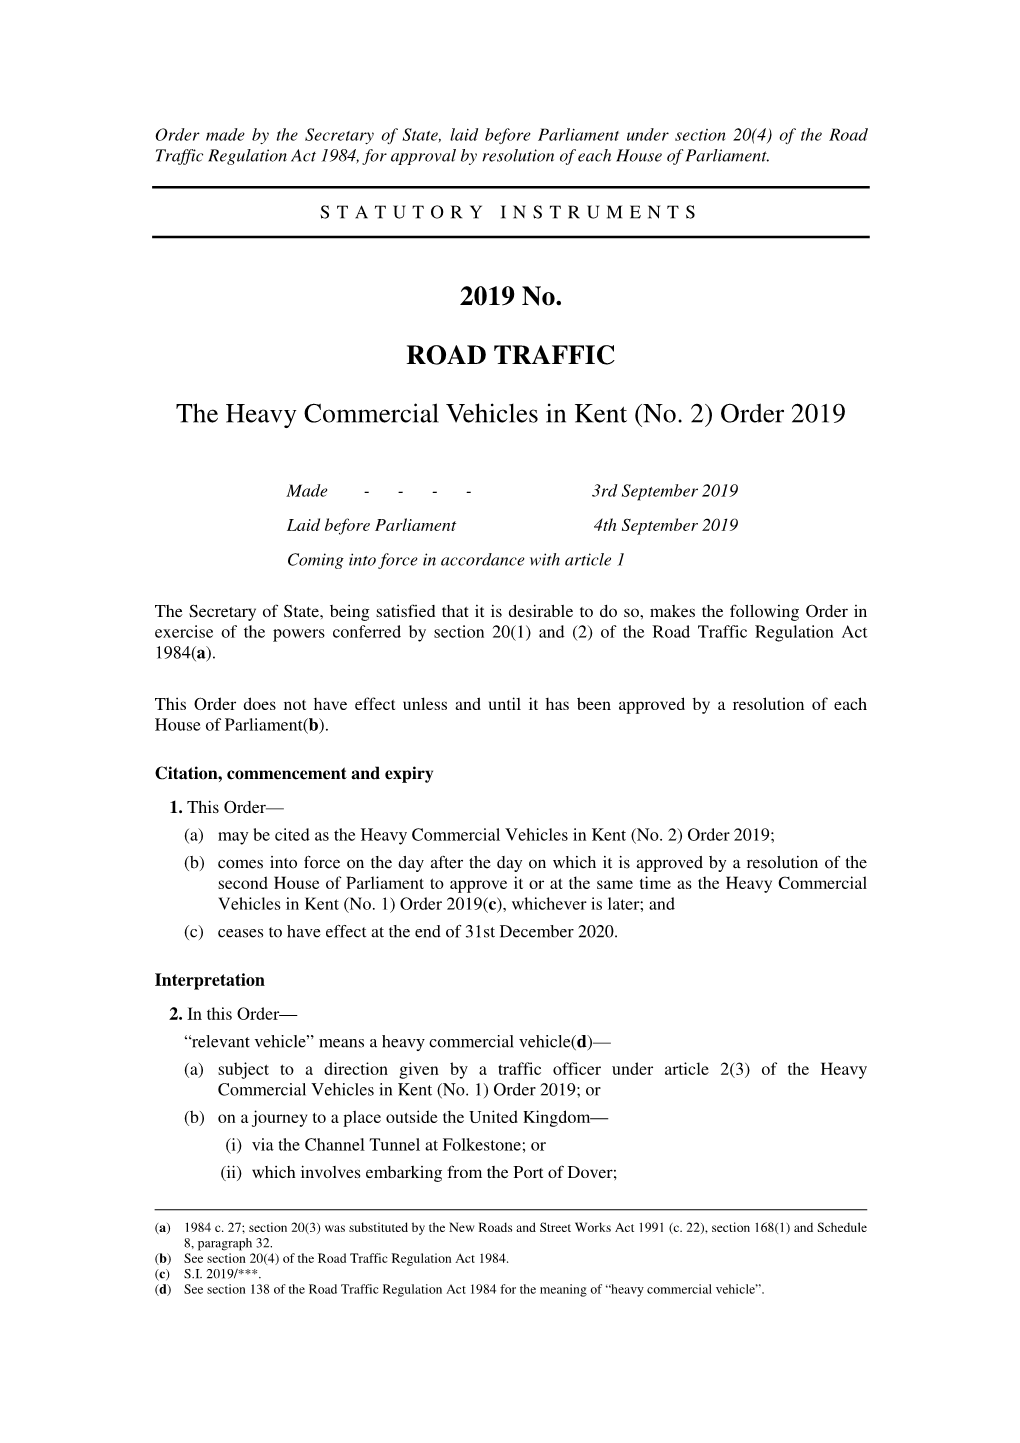 The Heavy Commercial Vehicles in Kent (No. 2) Order 2019